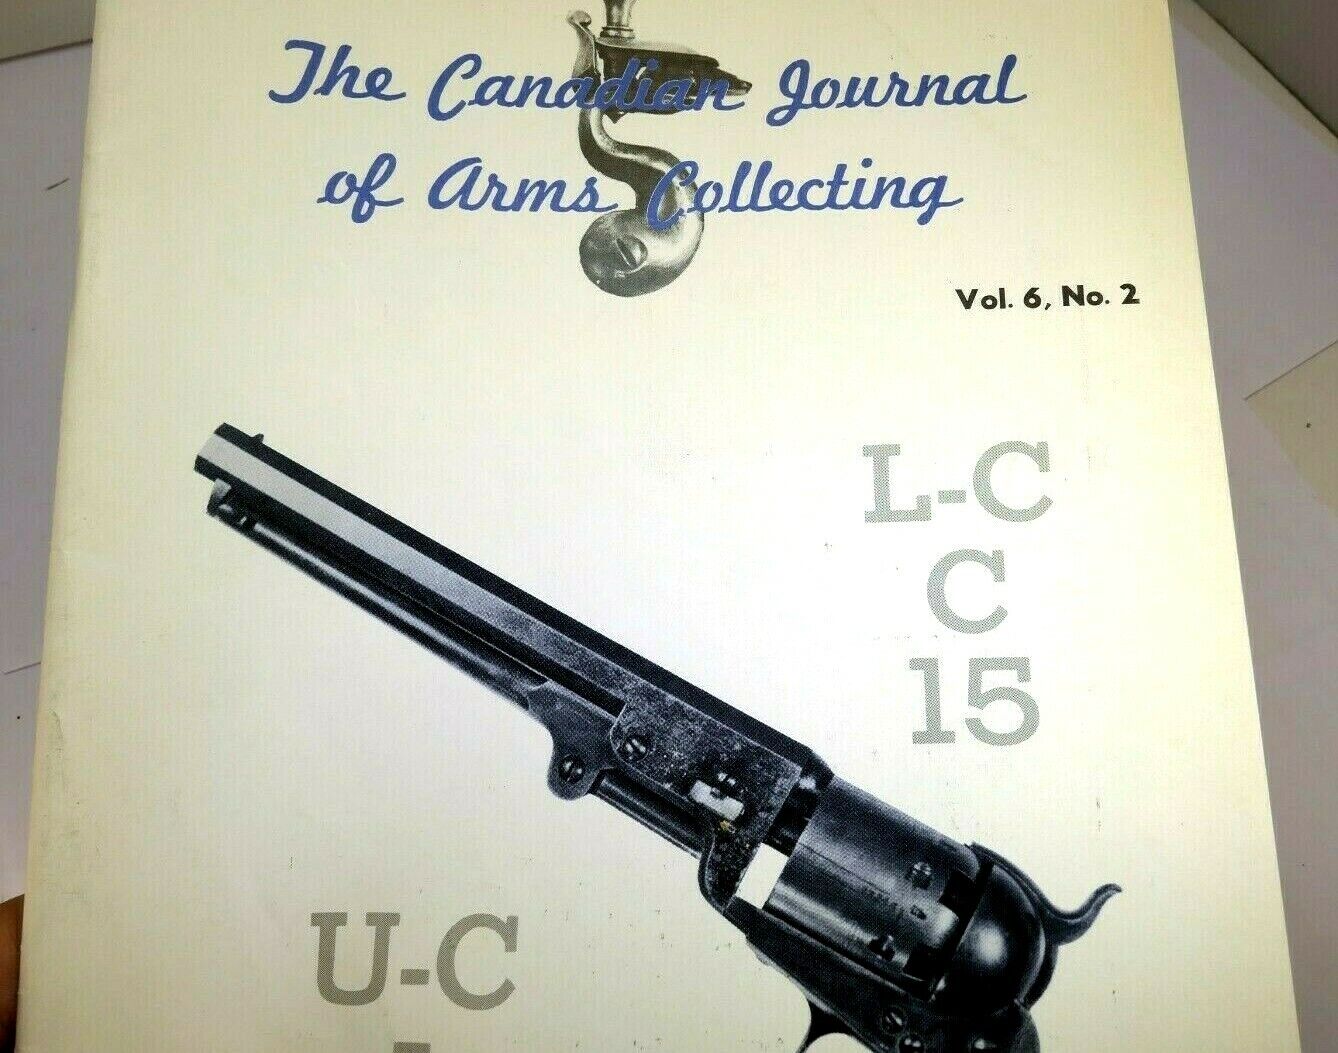 The Canadian Journal Of Arms Collecting Vol 6, No 2 May 1968 L-C 15 U-C I 17